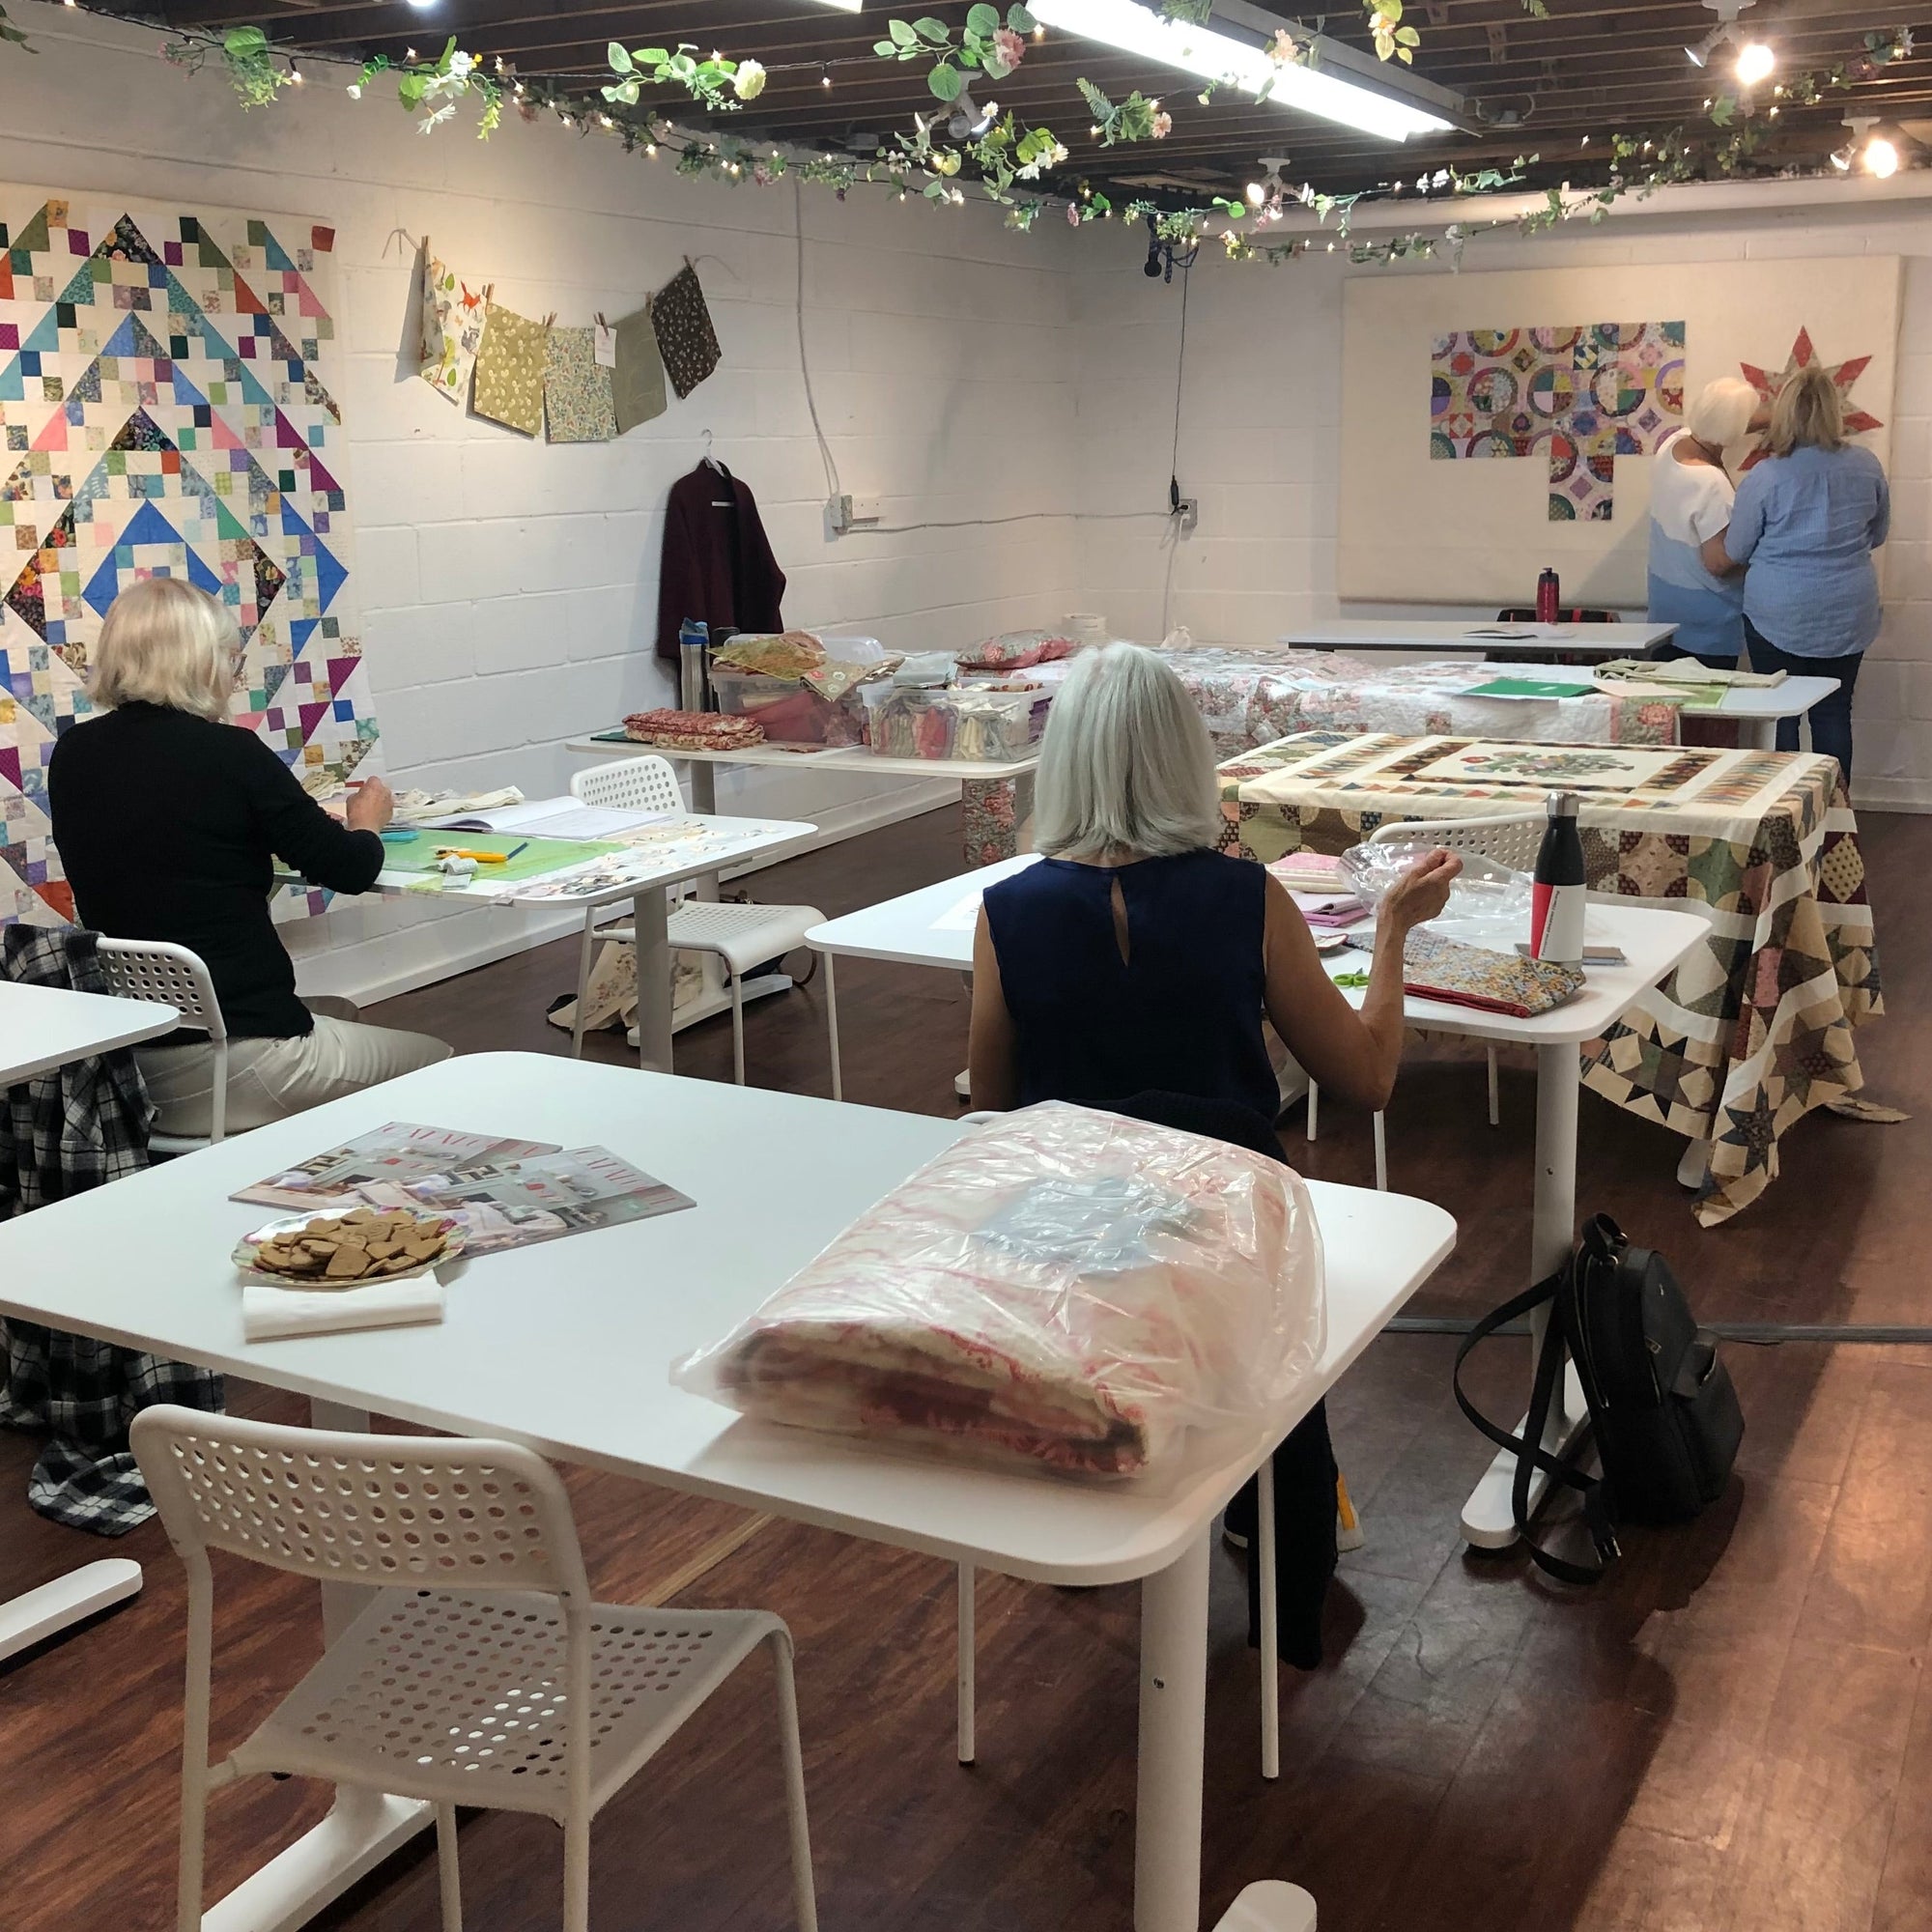 Quilting Drop In - Sunday May 26th 12pm to 3pm $19 per hour